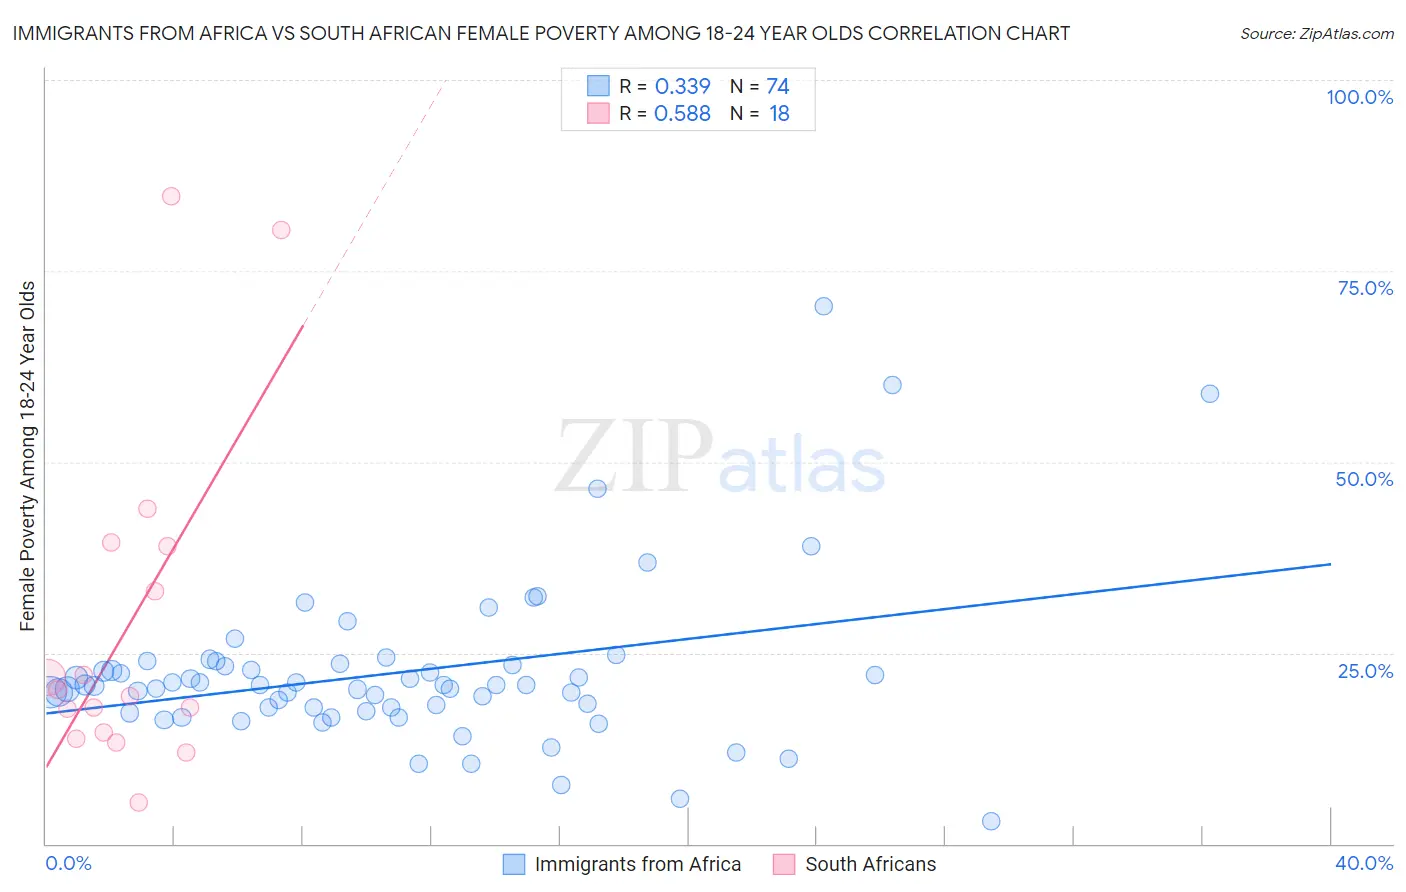 Immigrants from Africa vs South African Female Poverty Among 18-24 Year Olds